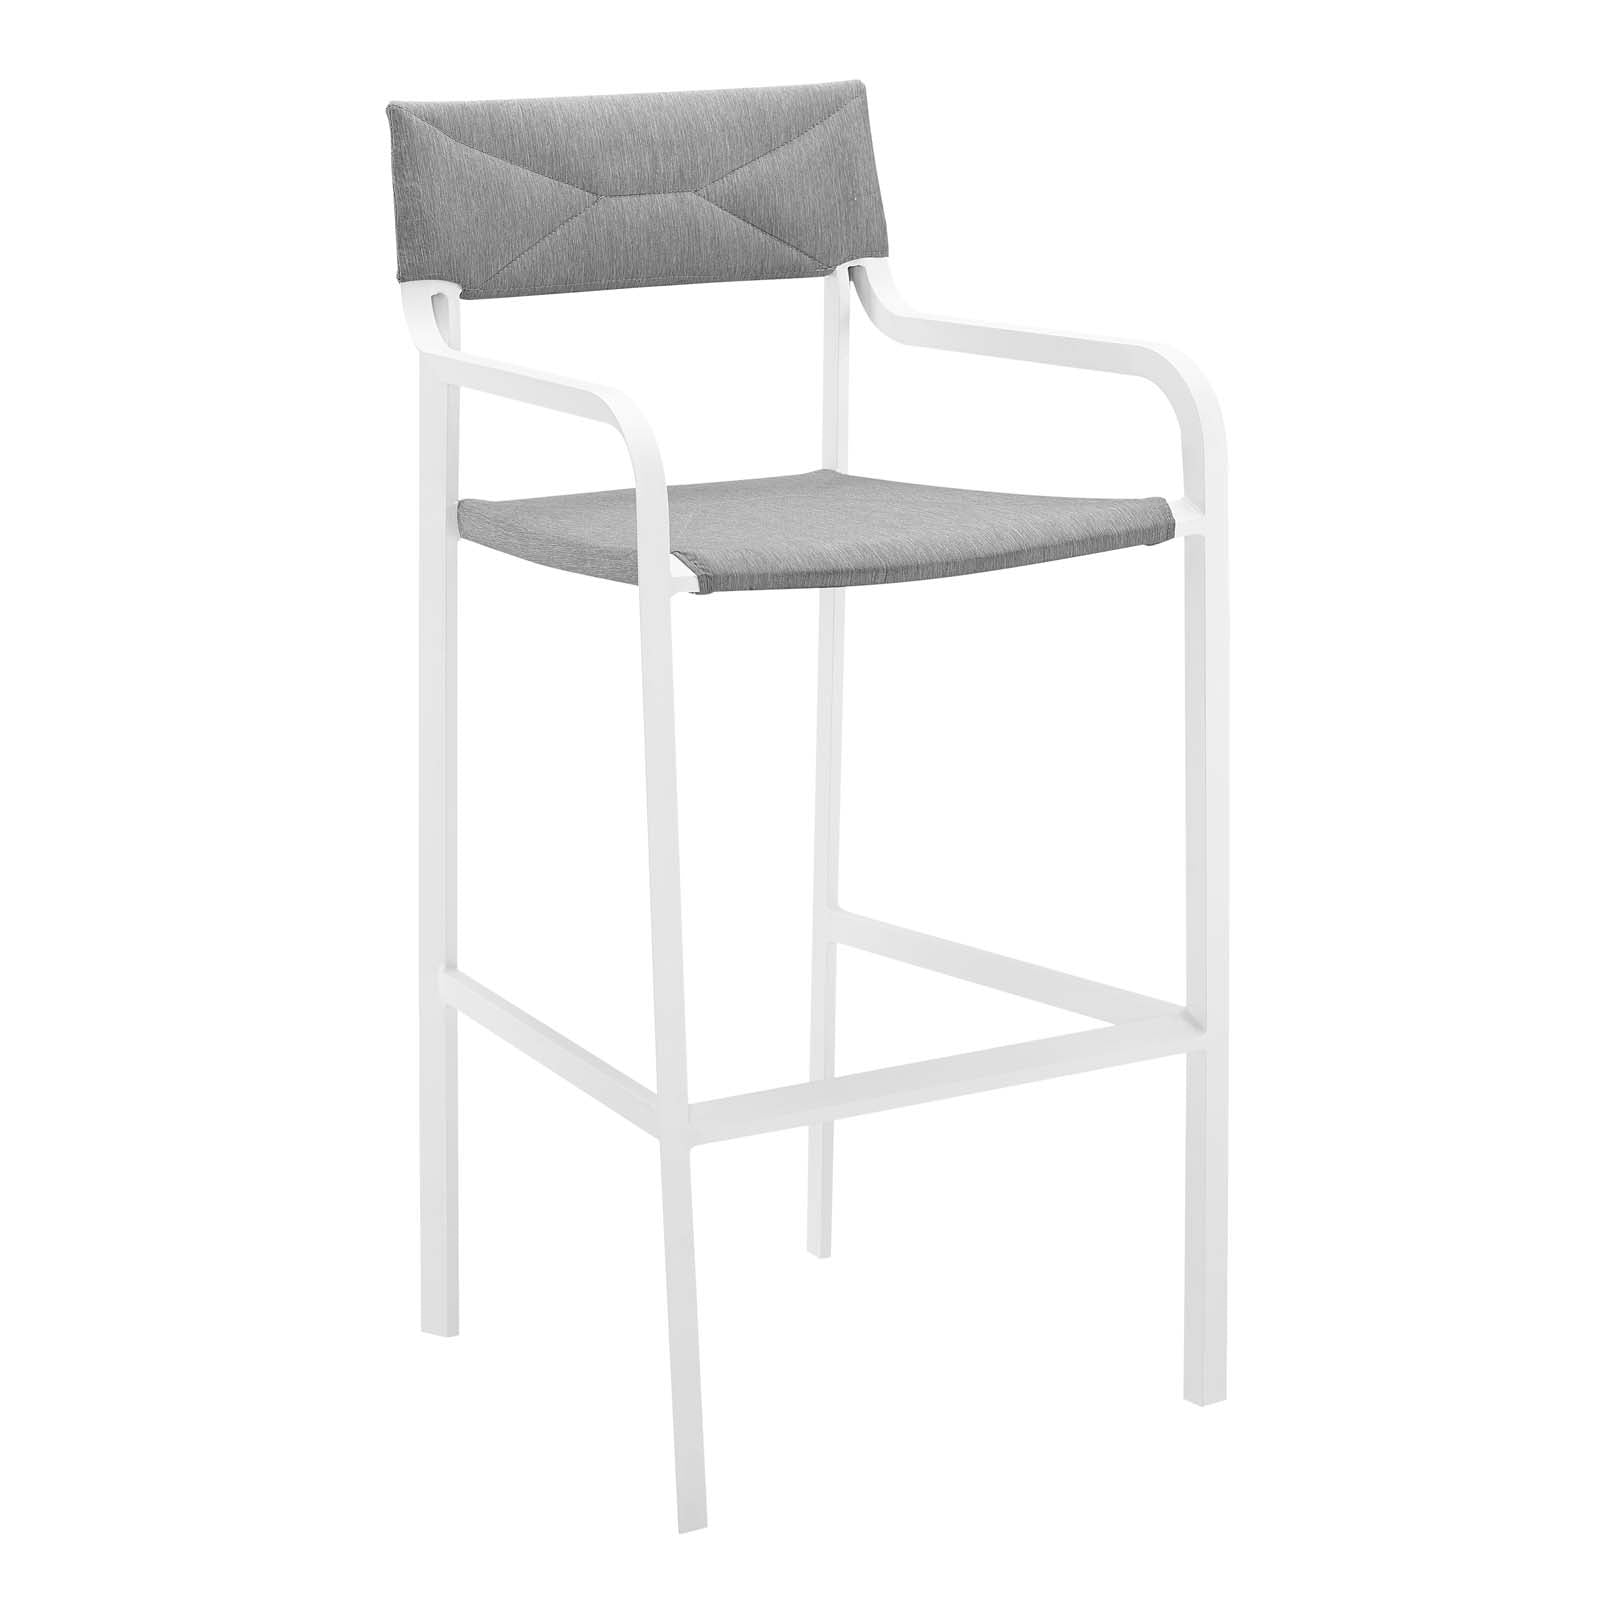 Modway Outdoor Dining Sets - Raleigh 3 Piece Outdoor Patio Aluminum Bar Set White Gray